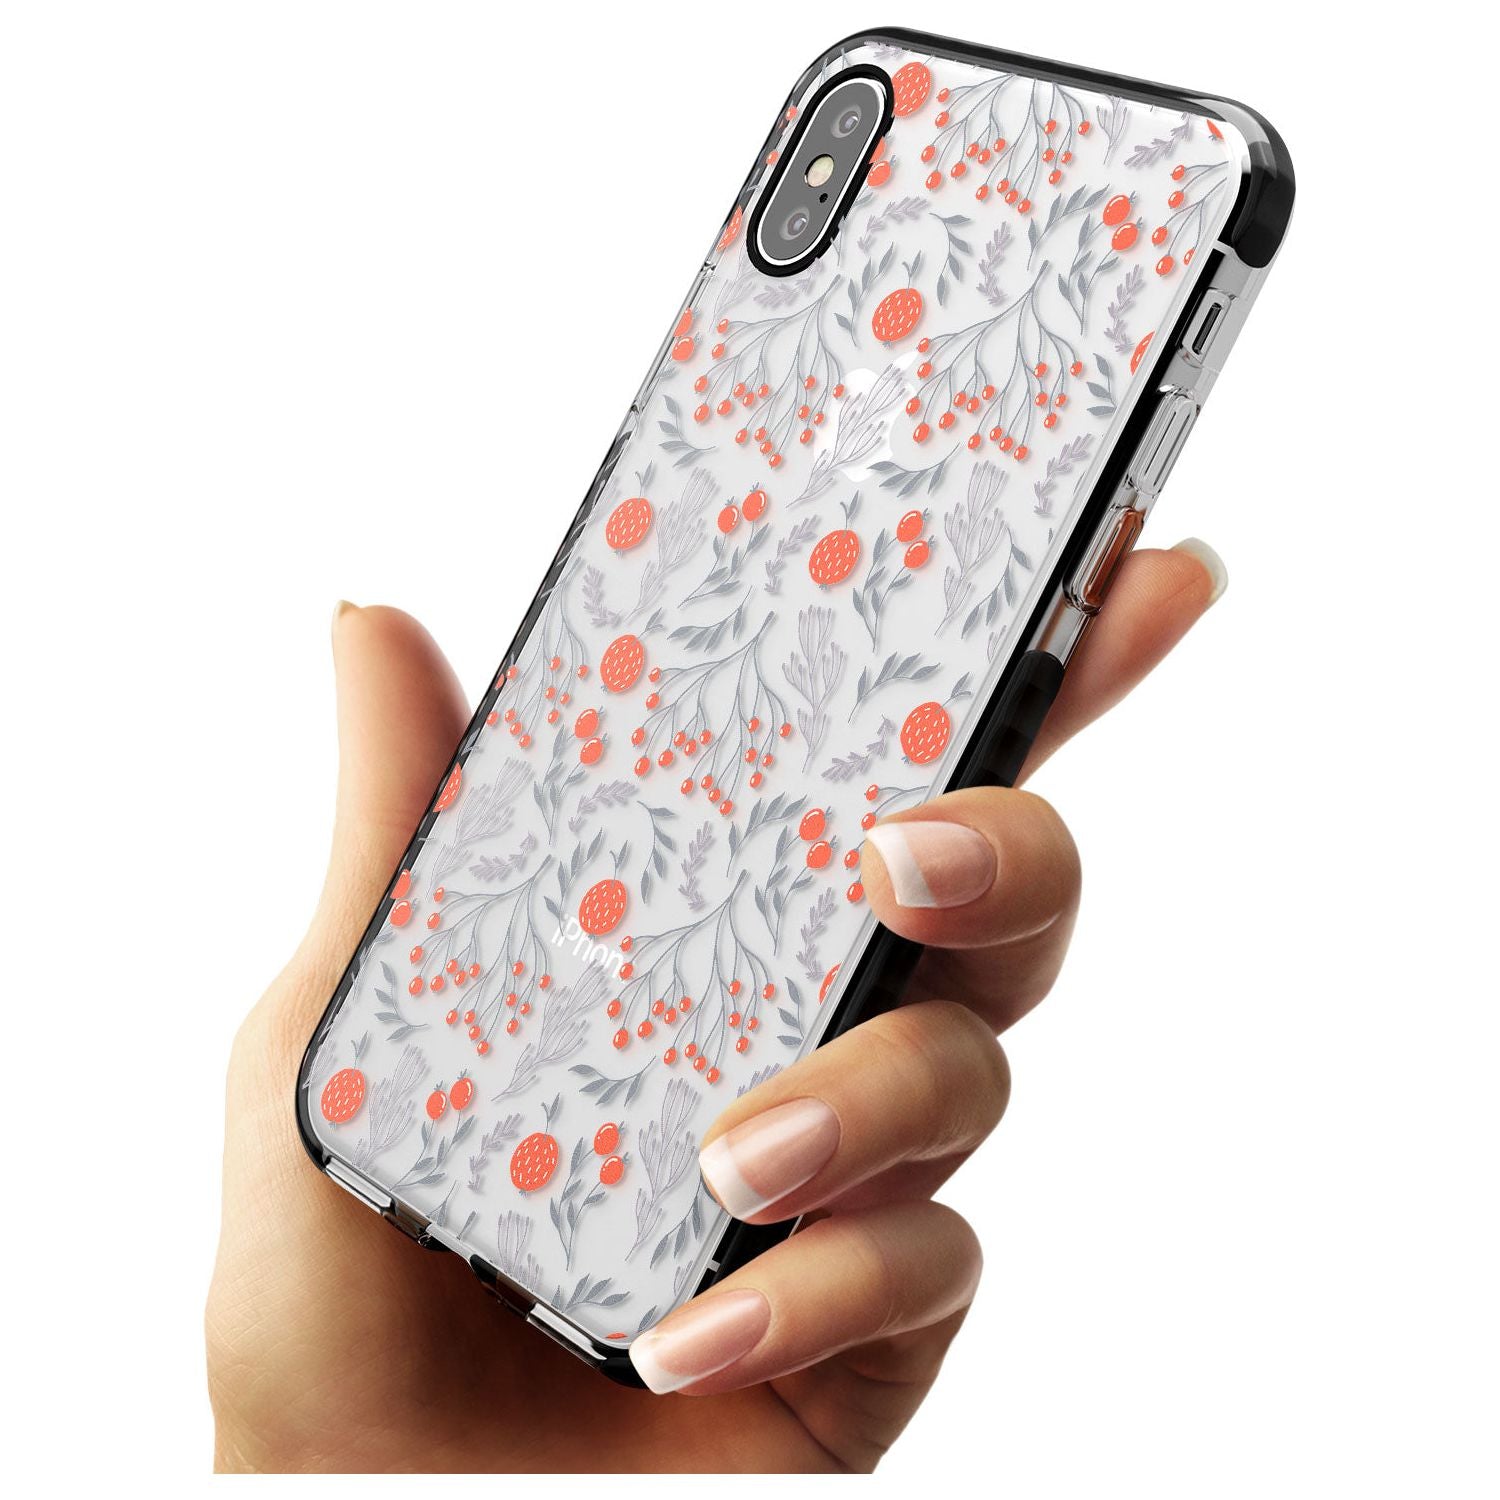 Red Fruits Transparent Floral Black Impact Phone Case for iPhone X XS Max XR